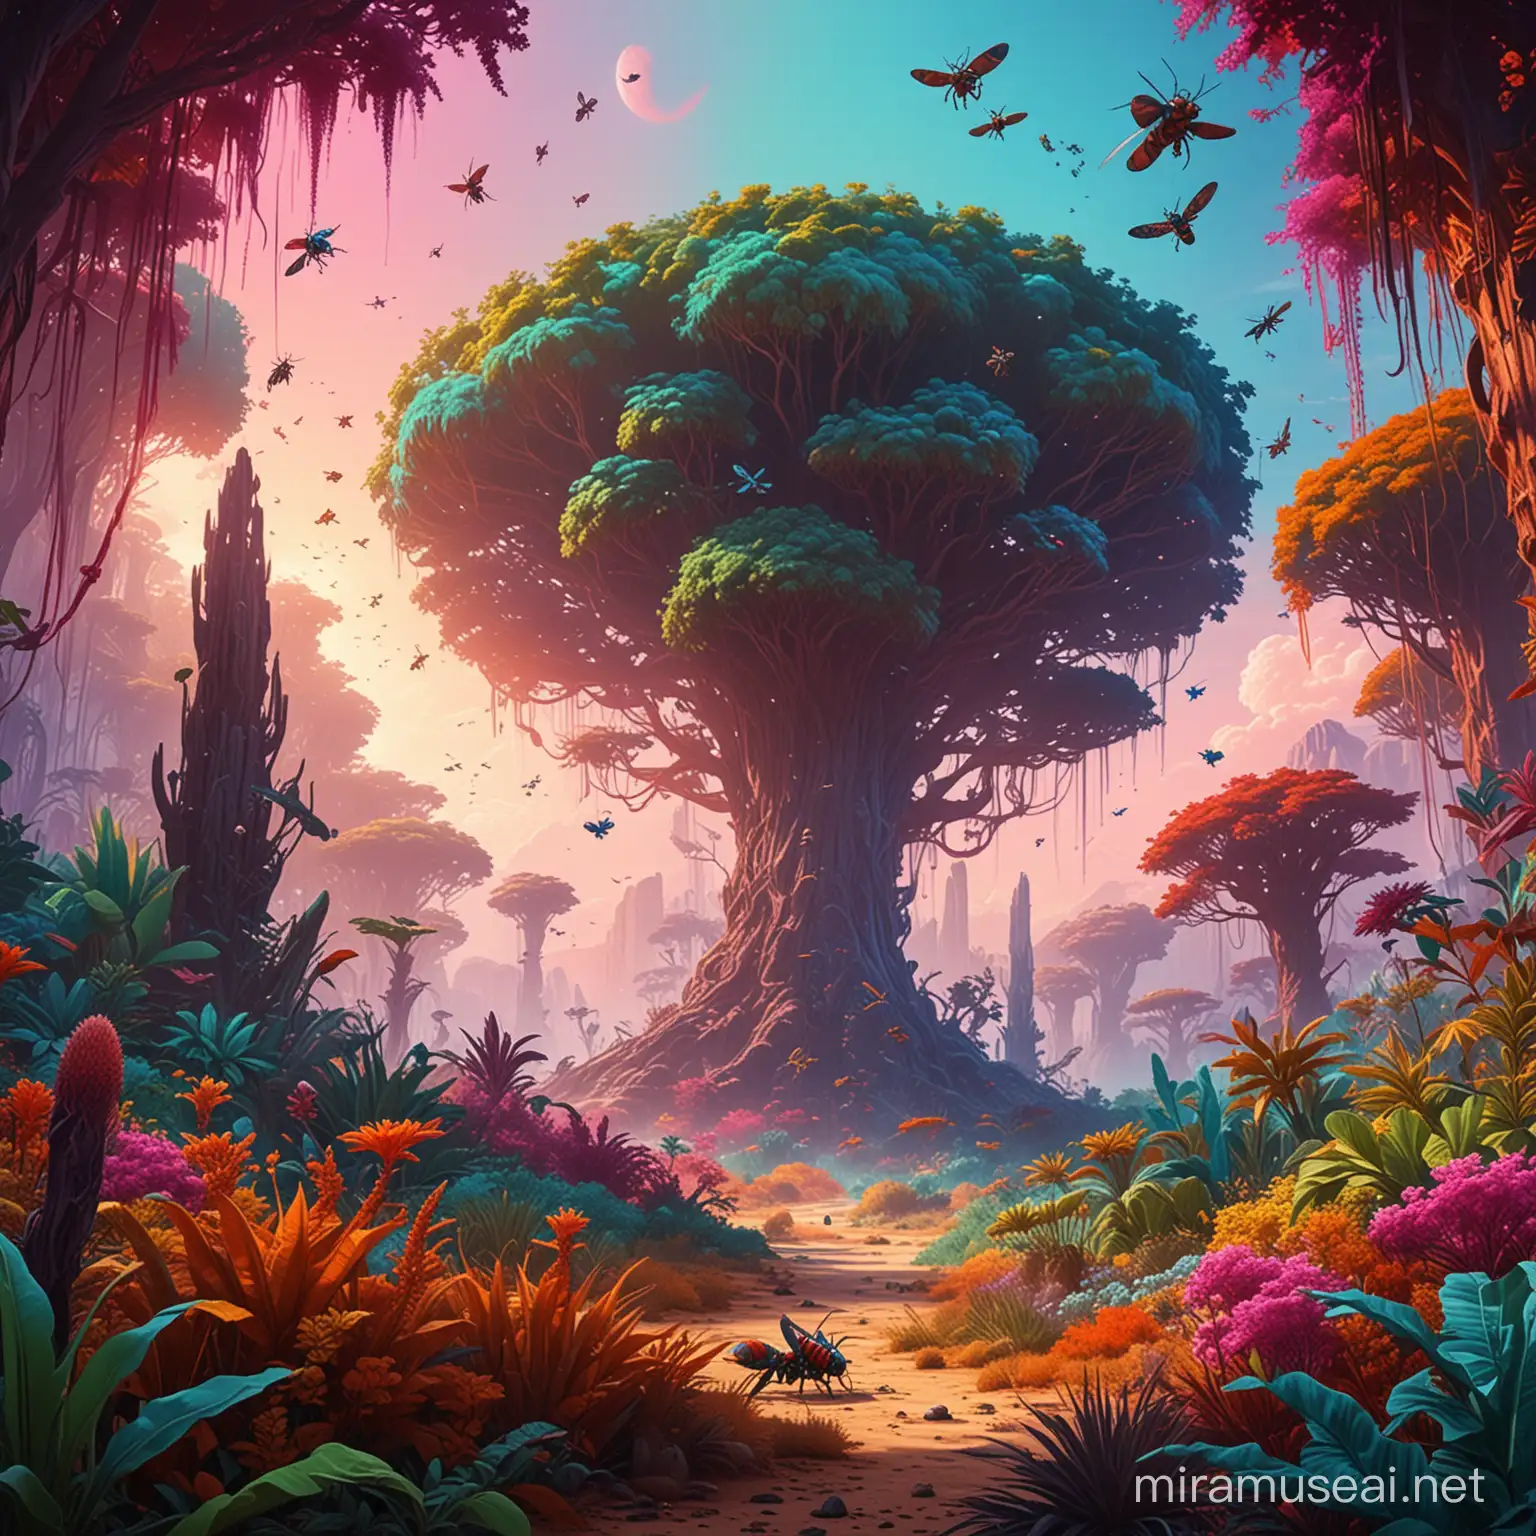 lush landscape on an alien planet with large tree-like plants, shrubs with vibrant colors, flying insects and large predator in the foreground, Contemporary art